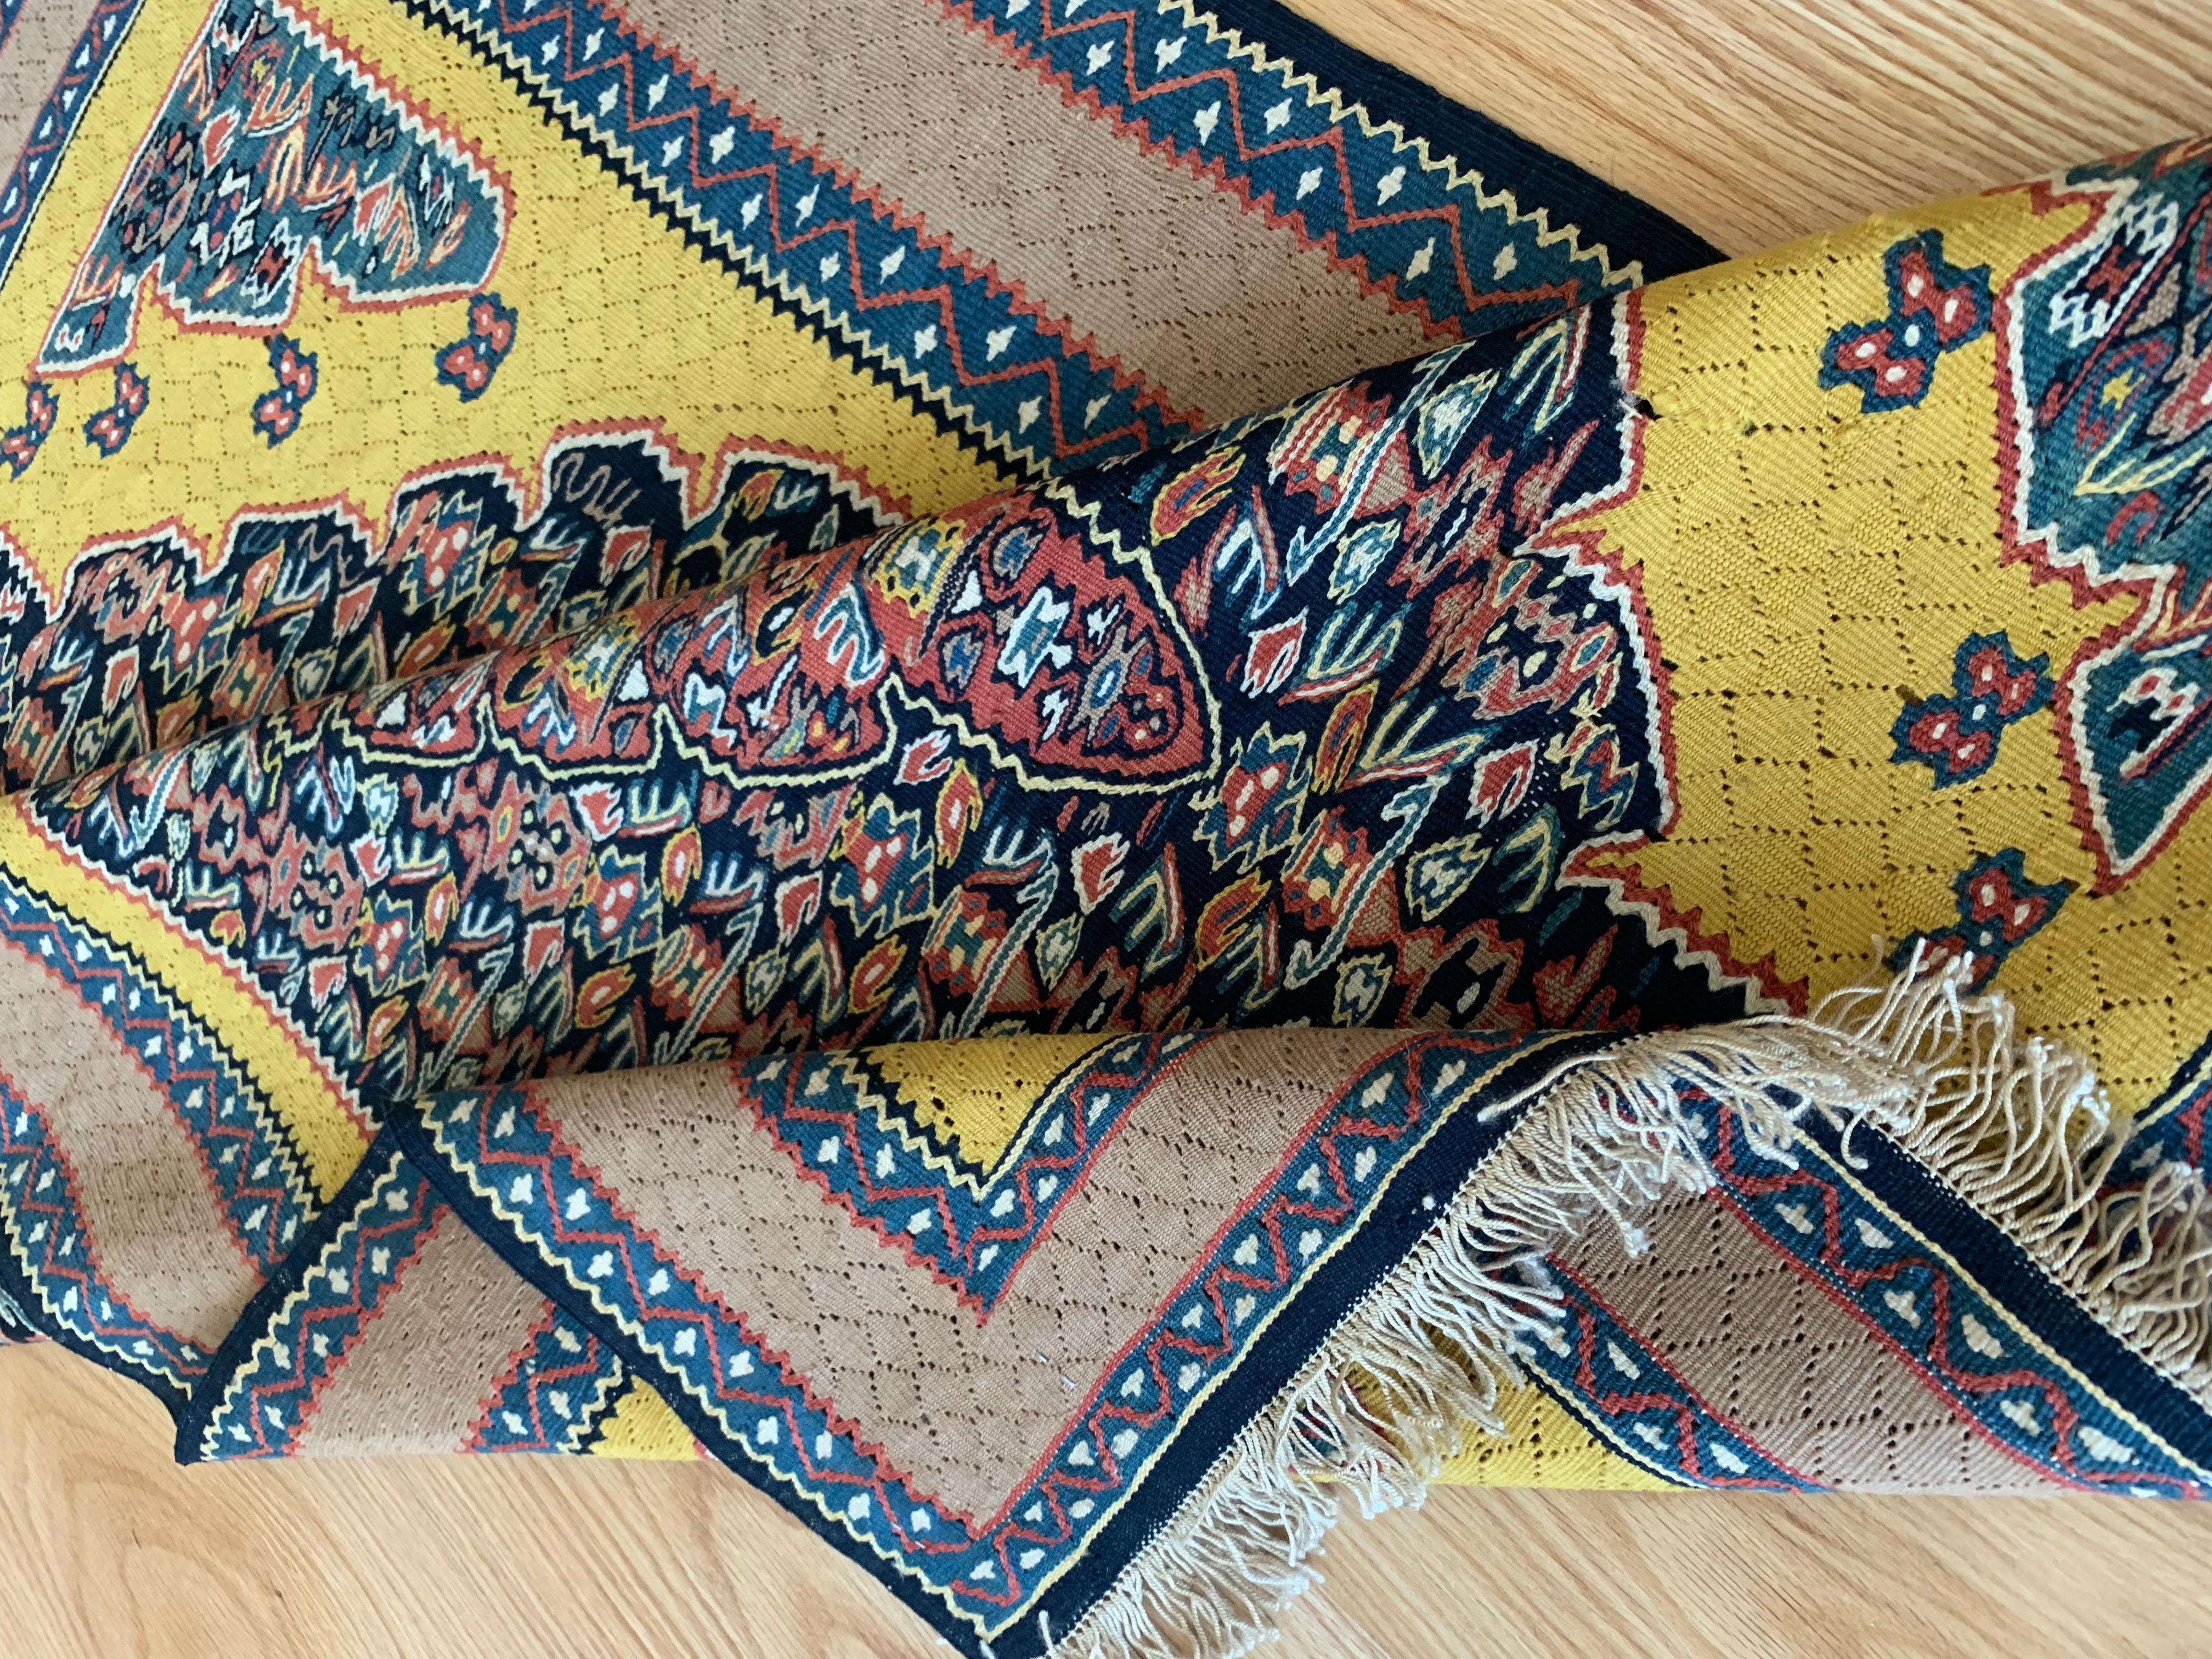 These bold yellow rugs area a pair of handmade flatwoven kilim rugs, construected in the early 2000s. The central design has been oven on a yellow background with a large medallion woven in accents of rust, blue and green that make up the intricate